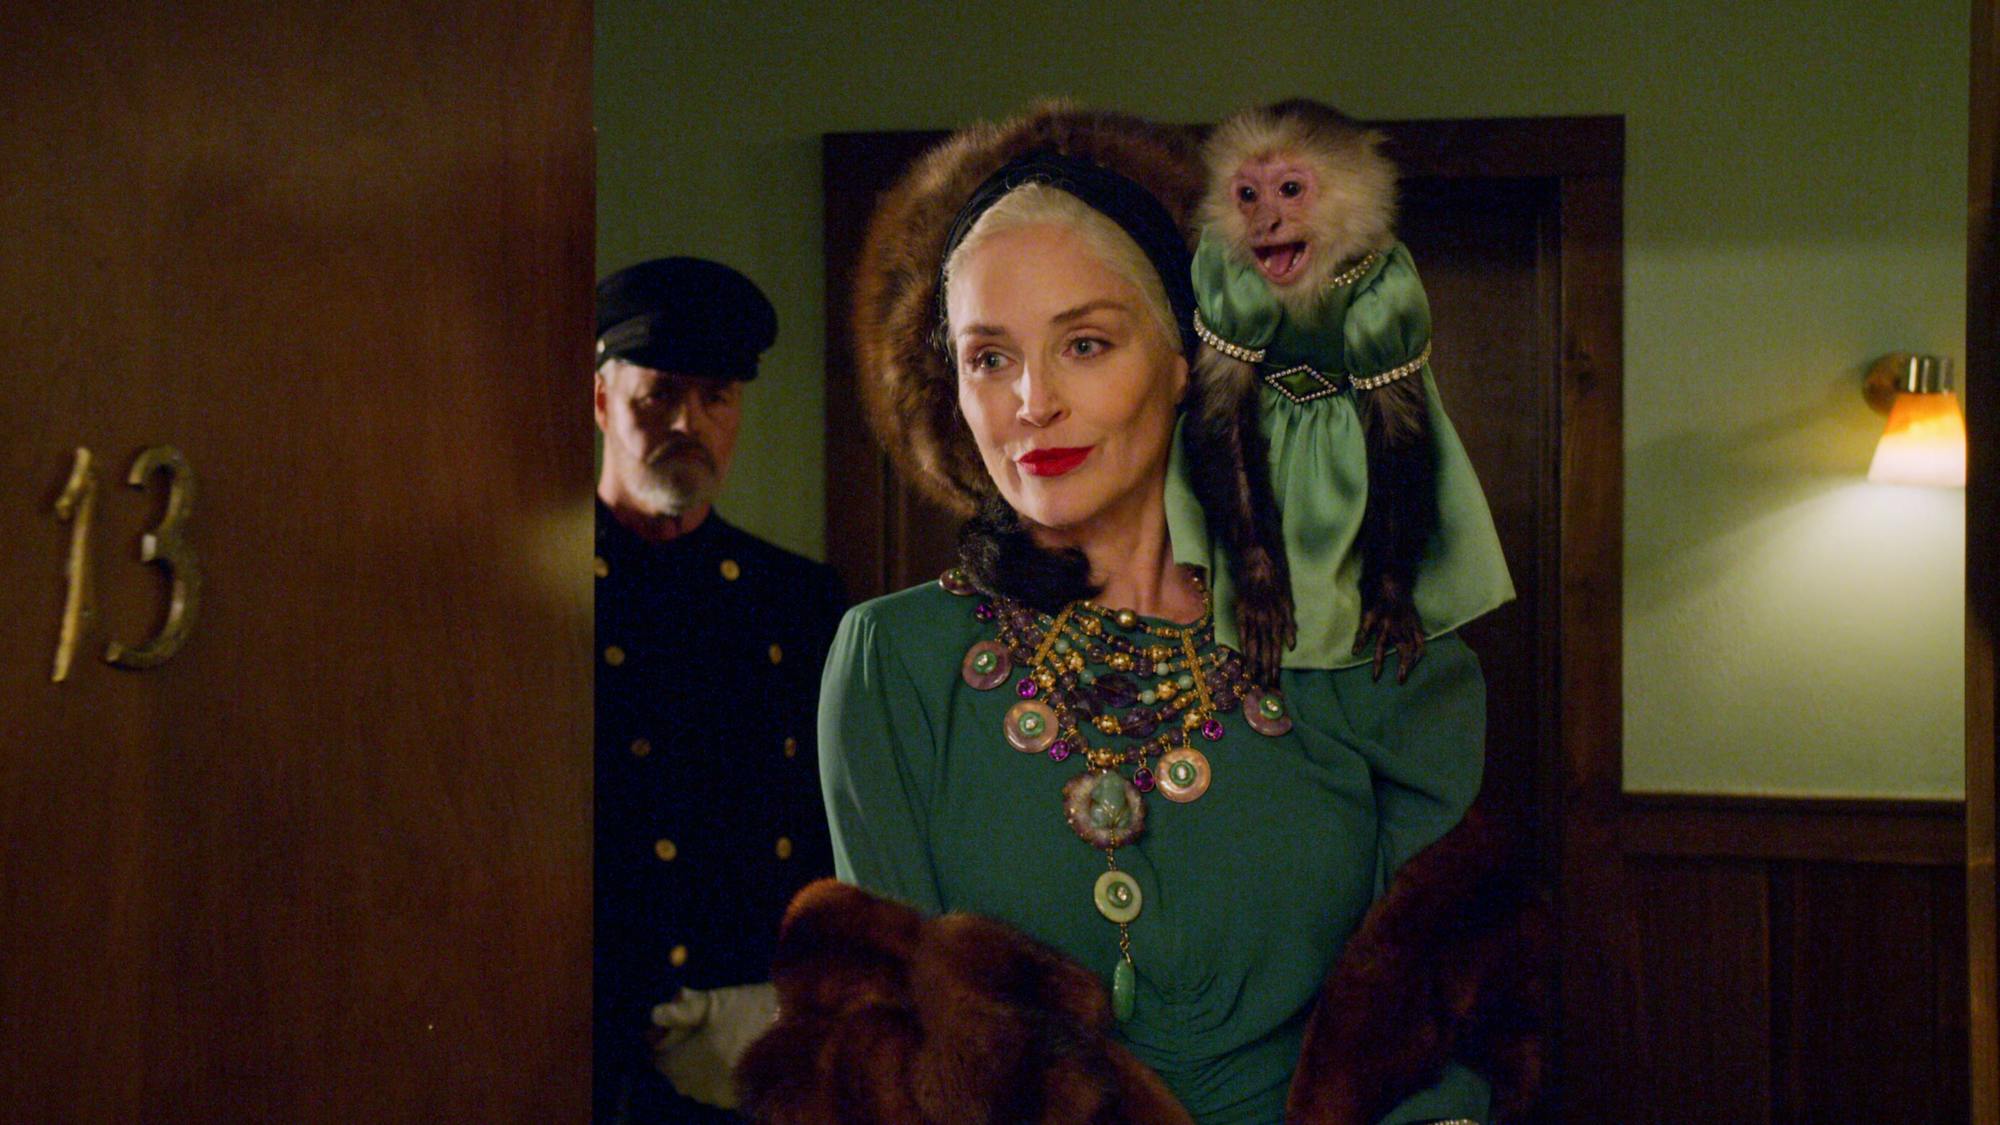 Lenore Osgood is pictured in a green dress and furs, all perfectly coordinated to match the monkey perched on her shoulder. 